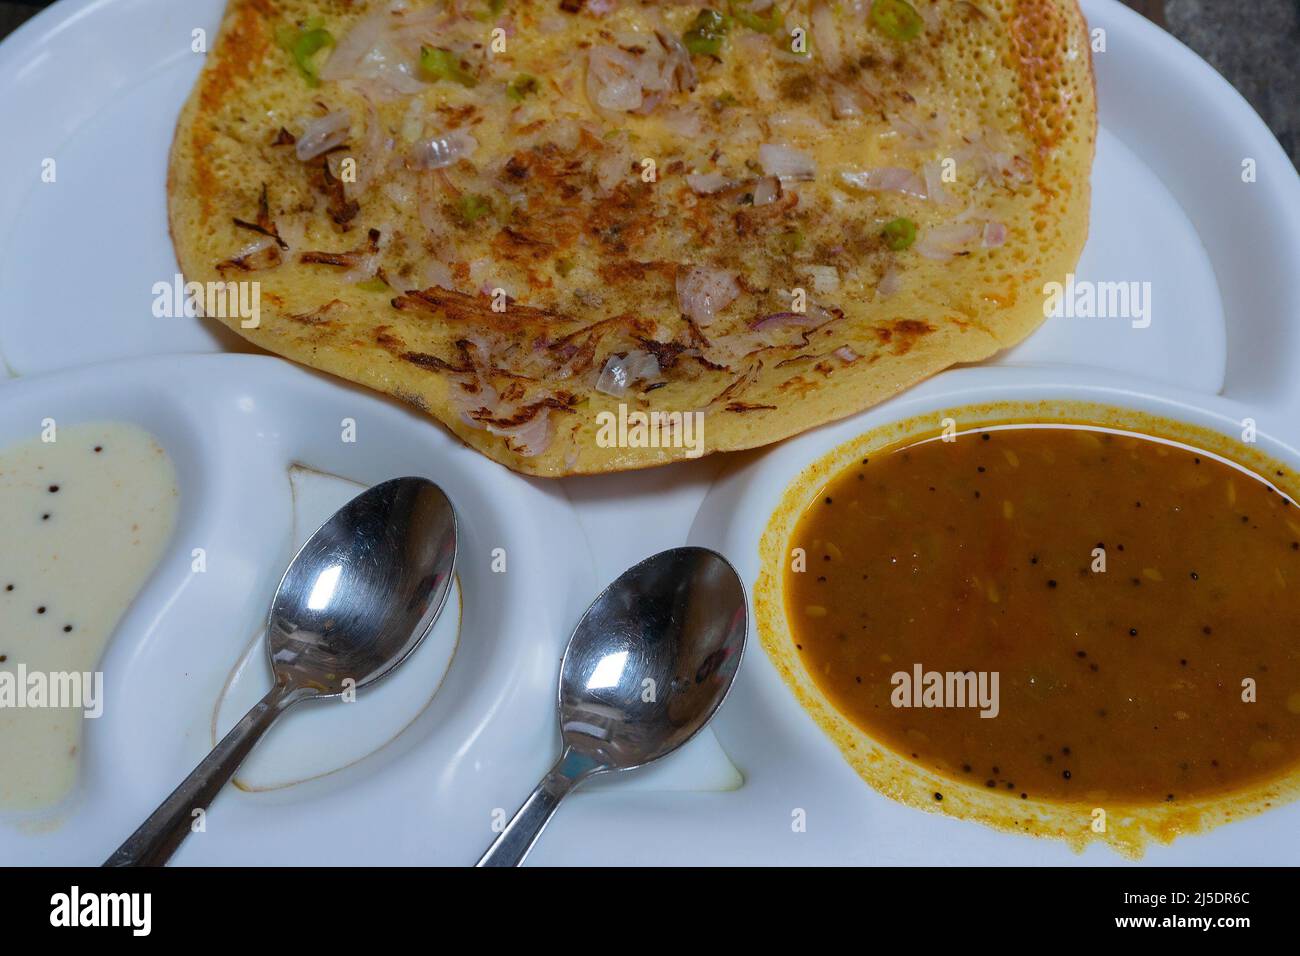 Uttapam is served with chutney on white plate, Indian vegetable dish. Stock Photo